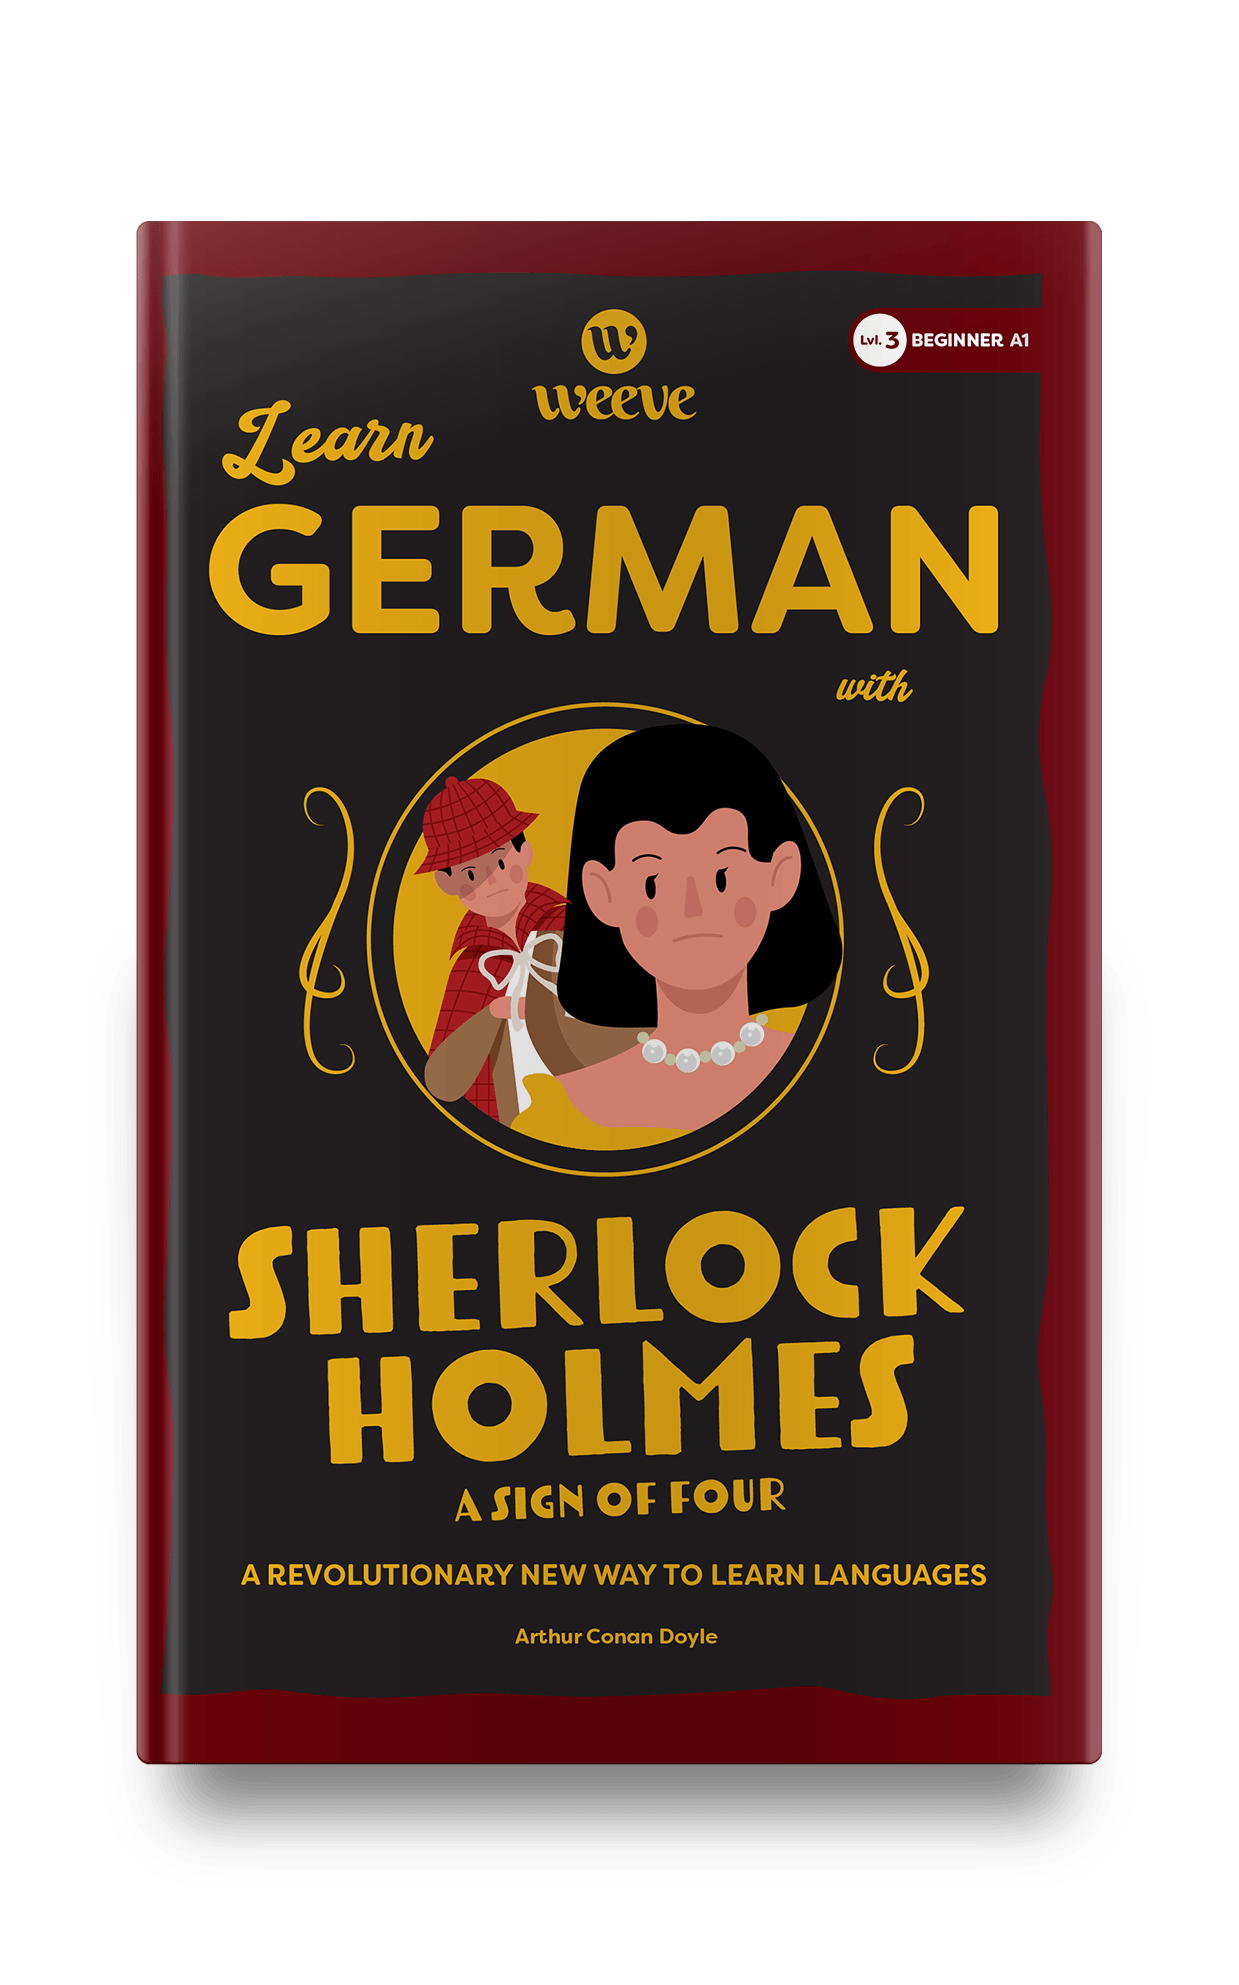 Learn German with Sherlock Holmes A Sign Of Four - Weeve